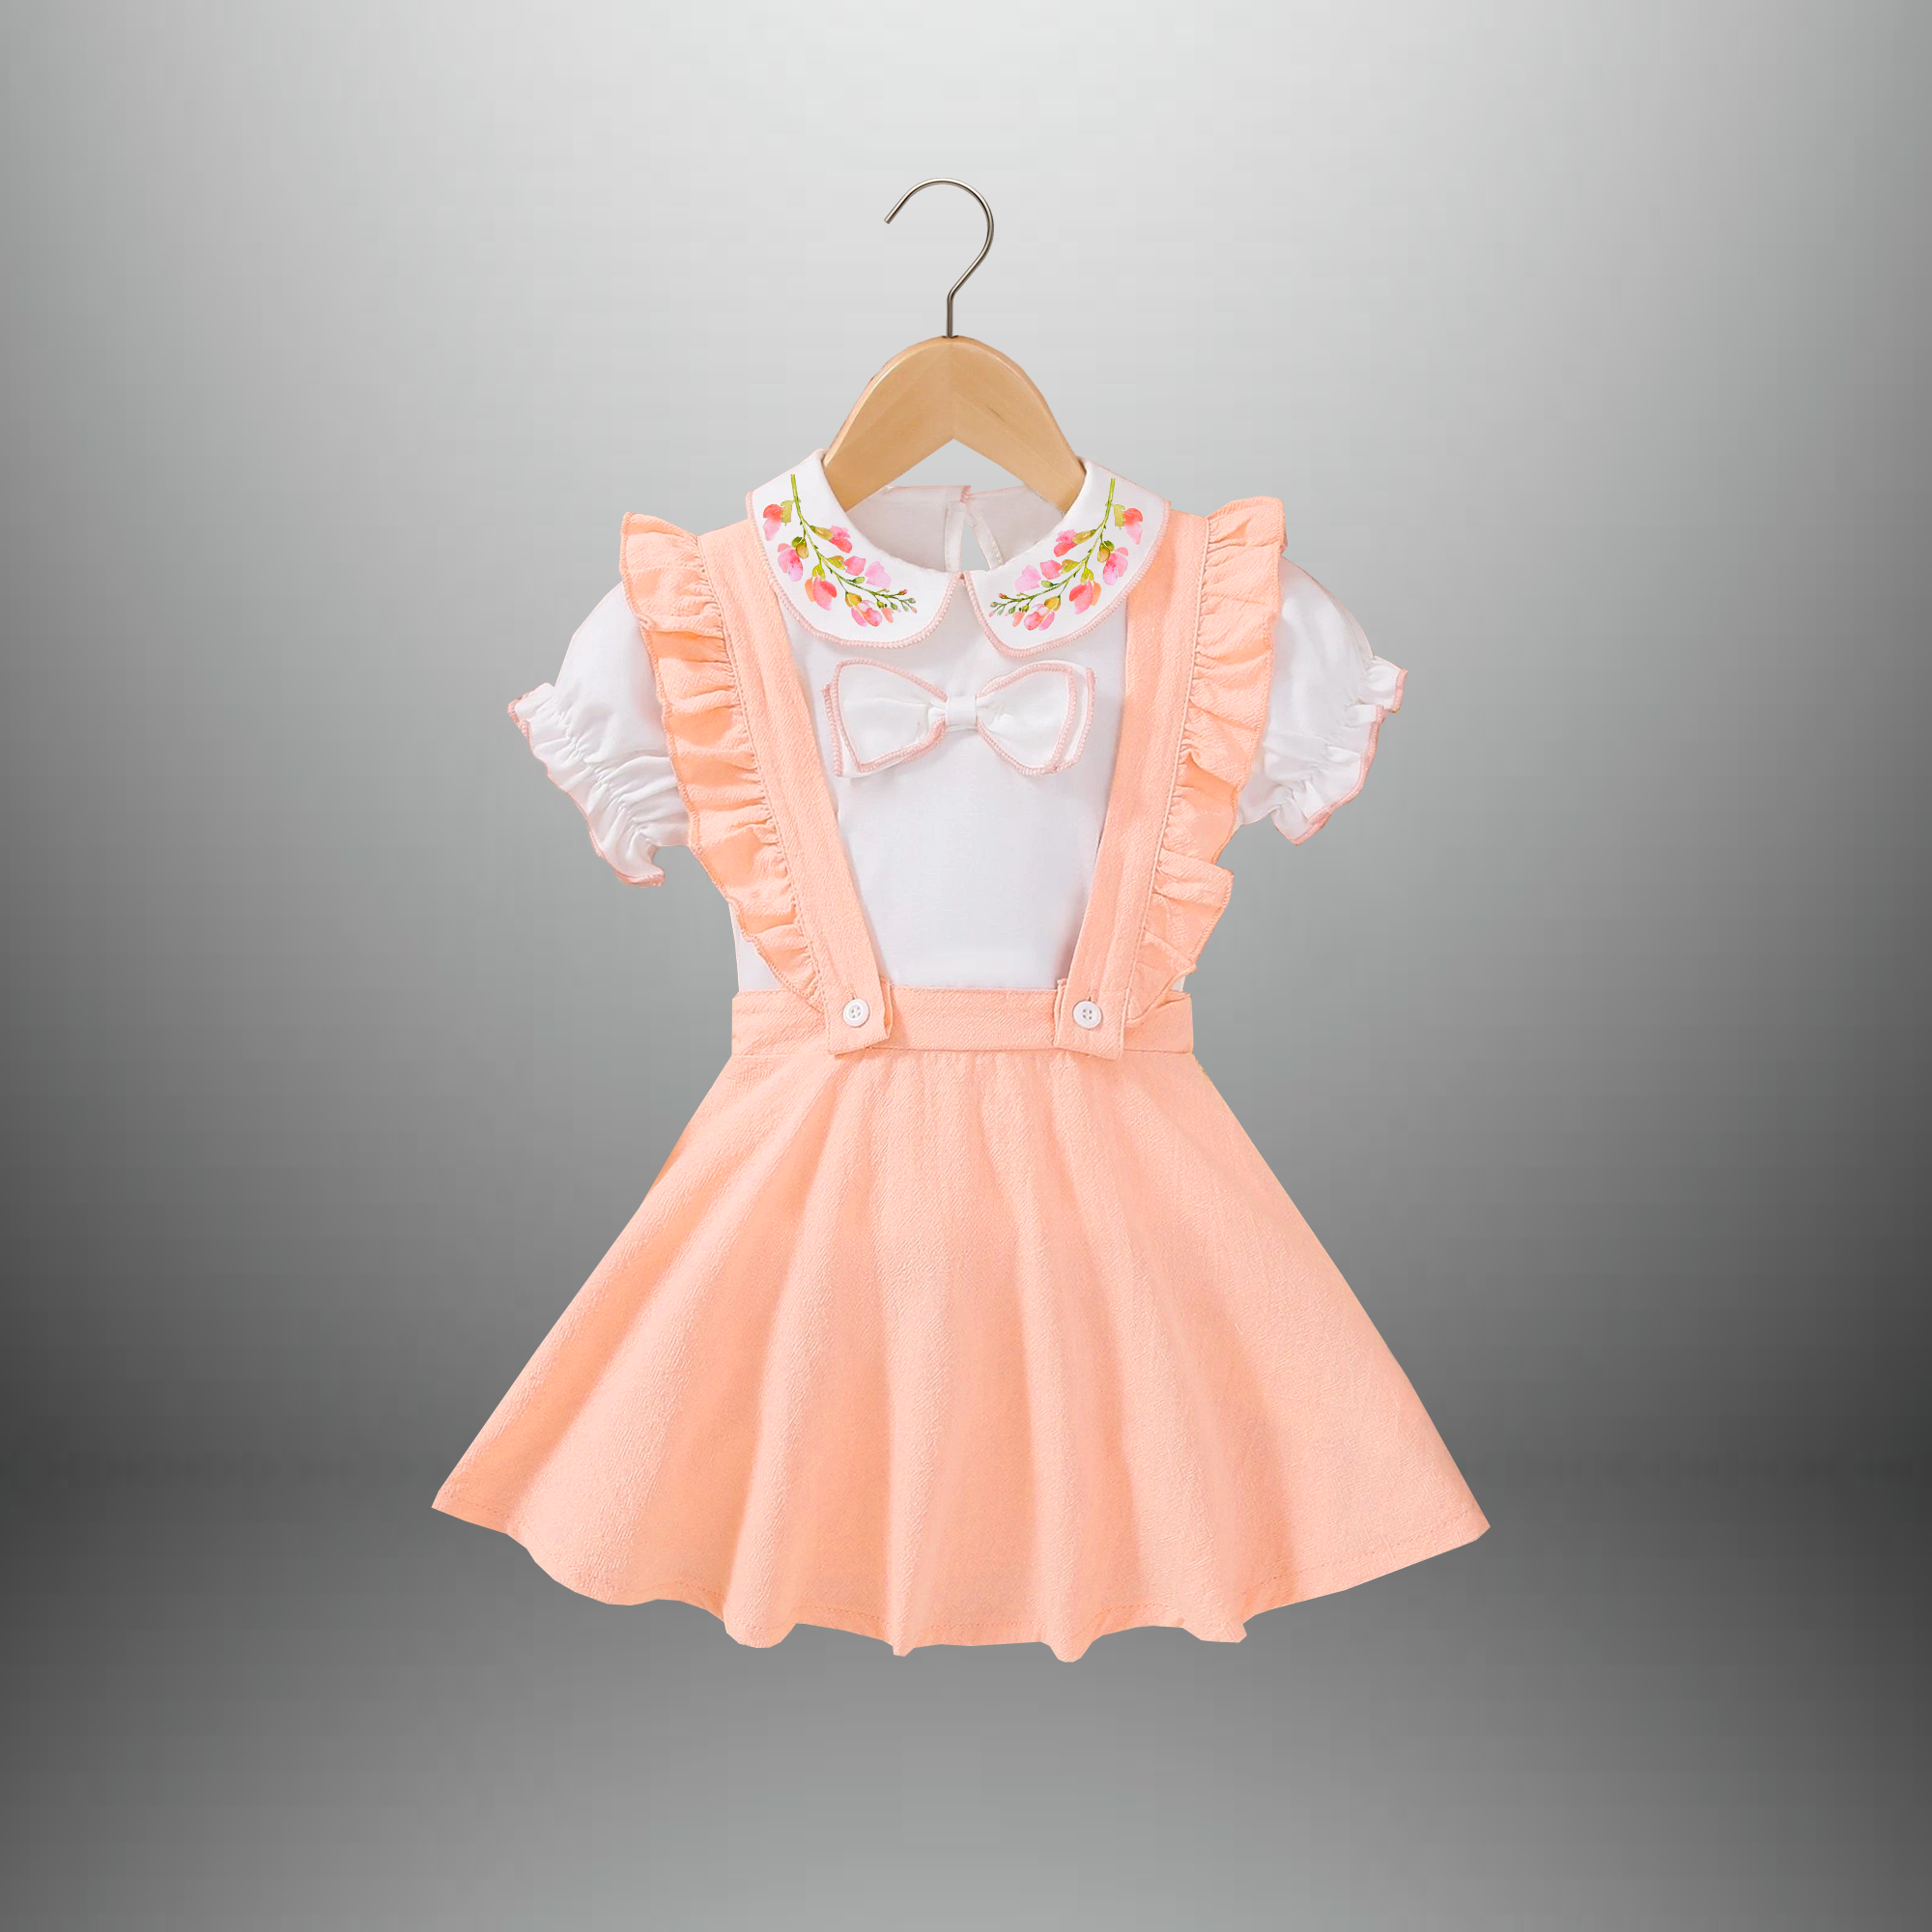 Girl's Two piece set of a puffed sleeve top with peter pan collar and dungaree styled skirt-RKFCW551